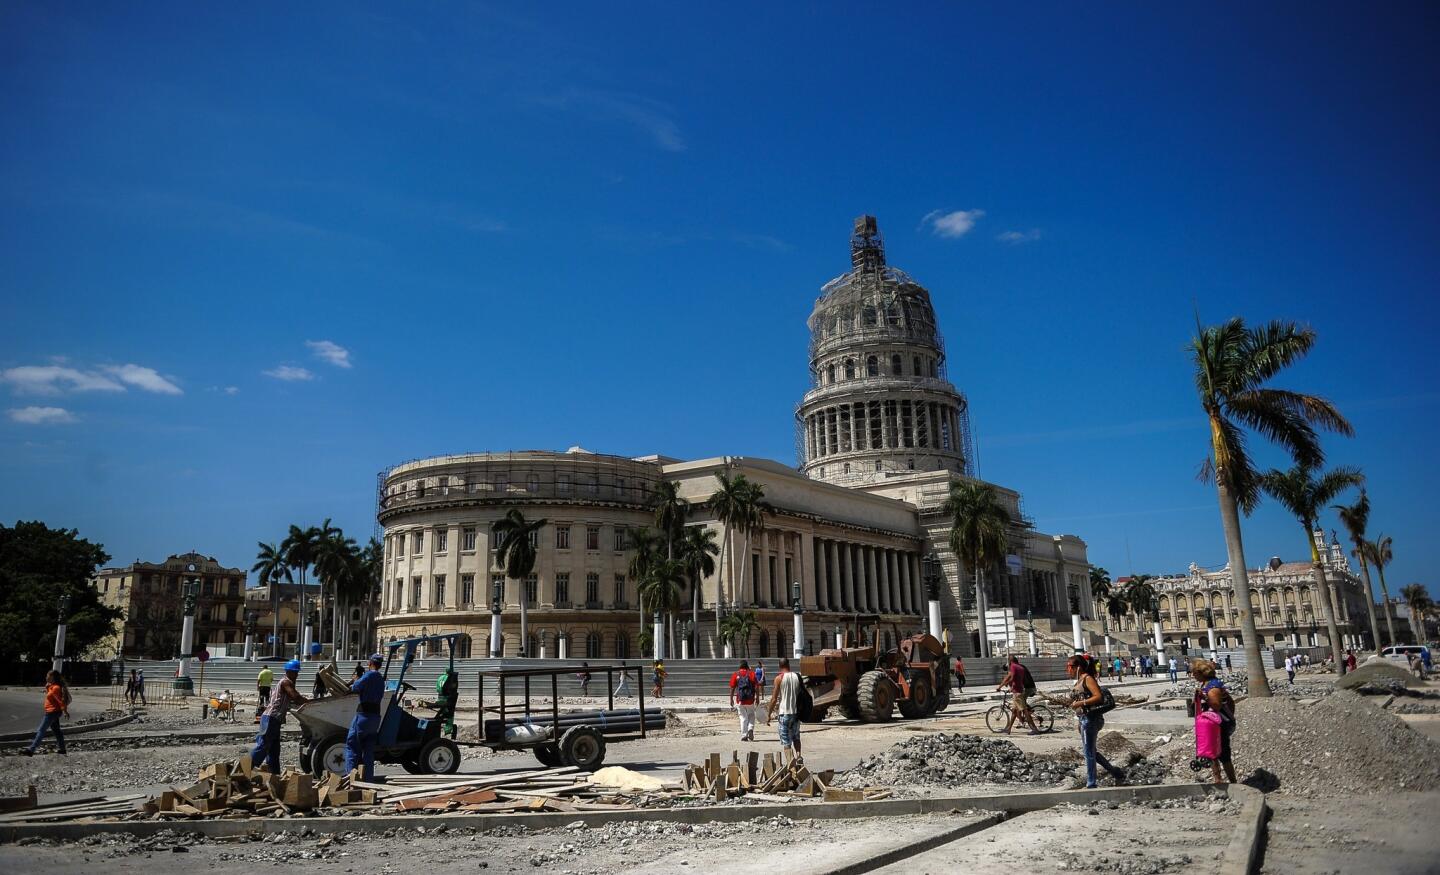 Workers repair a street near the Capitol in Havana, on March 16, 2016, during preparations ahead of President Barack Obama's visit.